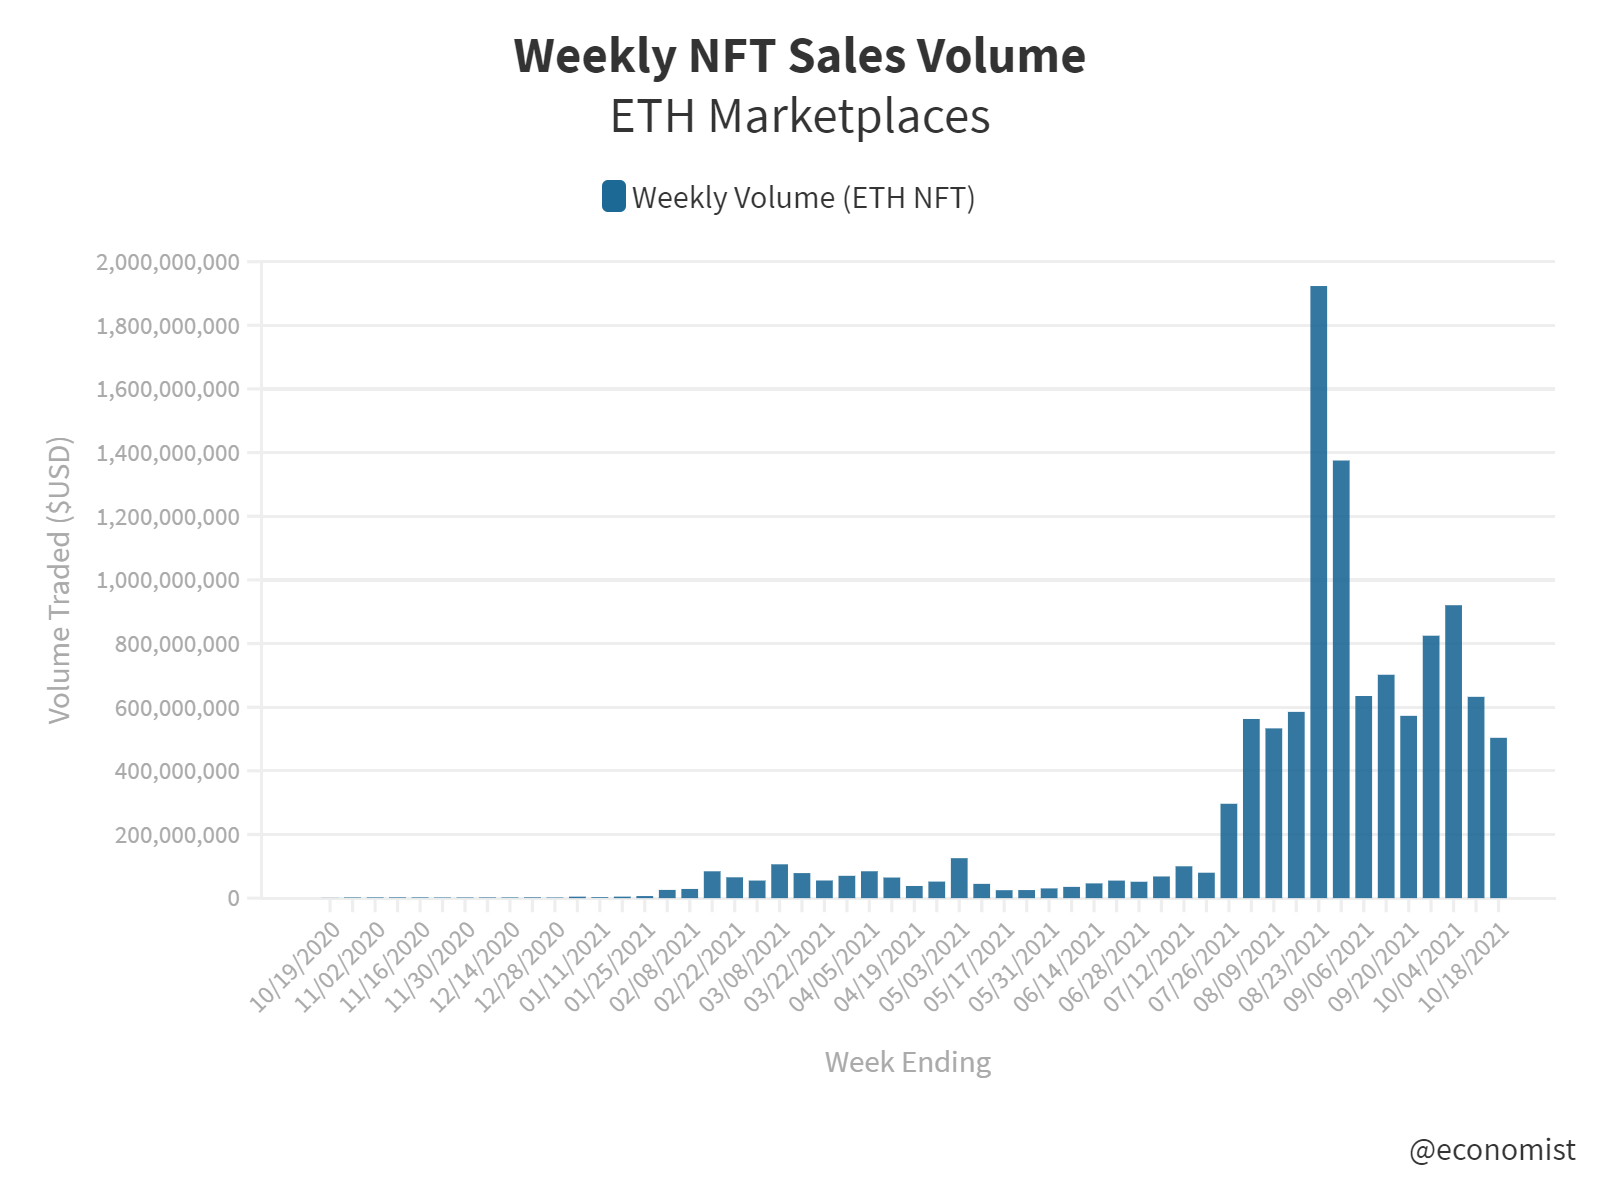 How will NFT NYC impact the NFT market?